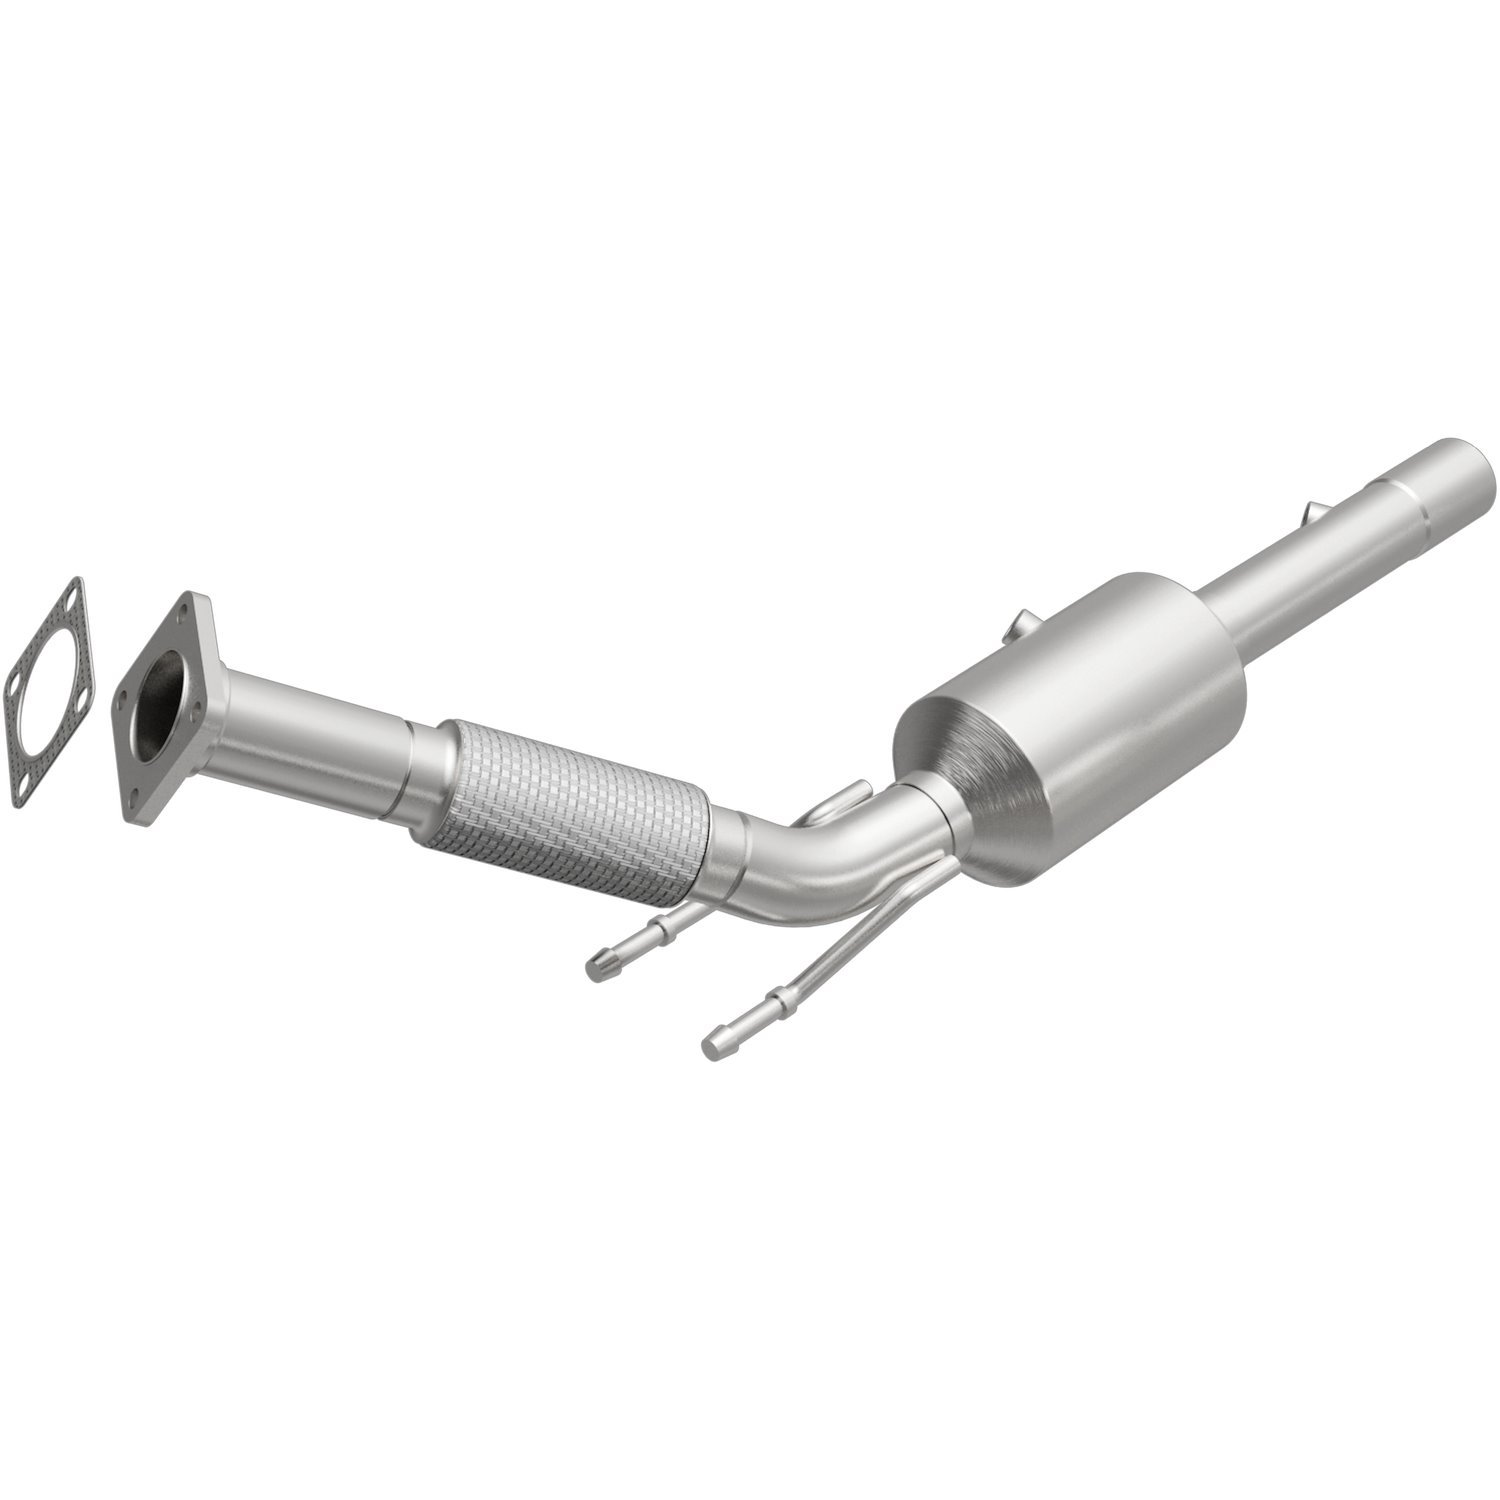 5661990 California-Grade CARB-Compliant Direct-Fit Catalytic Converter for Volkswagen